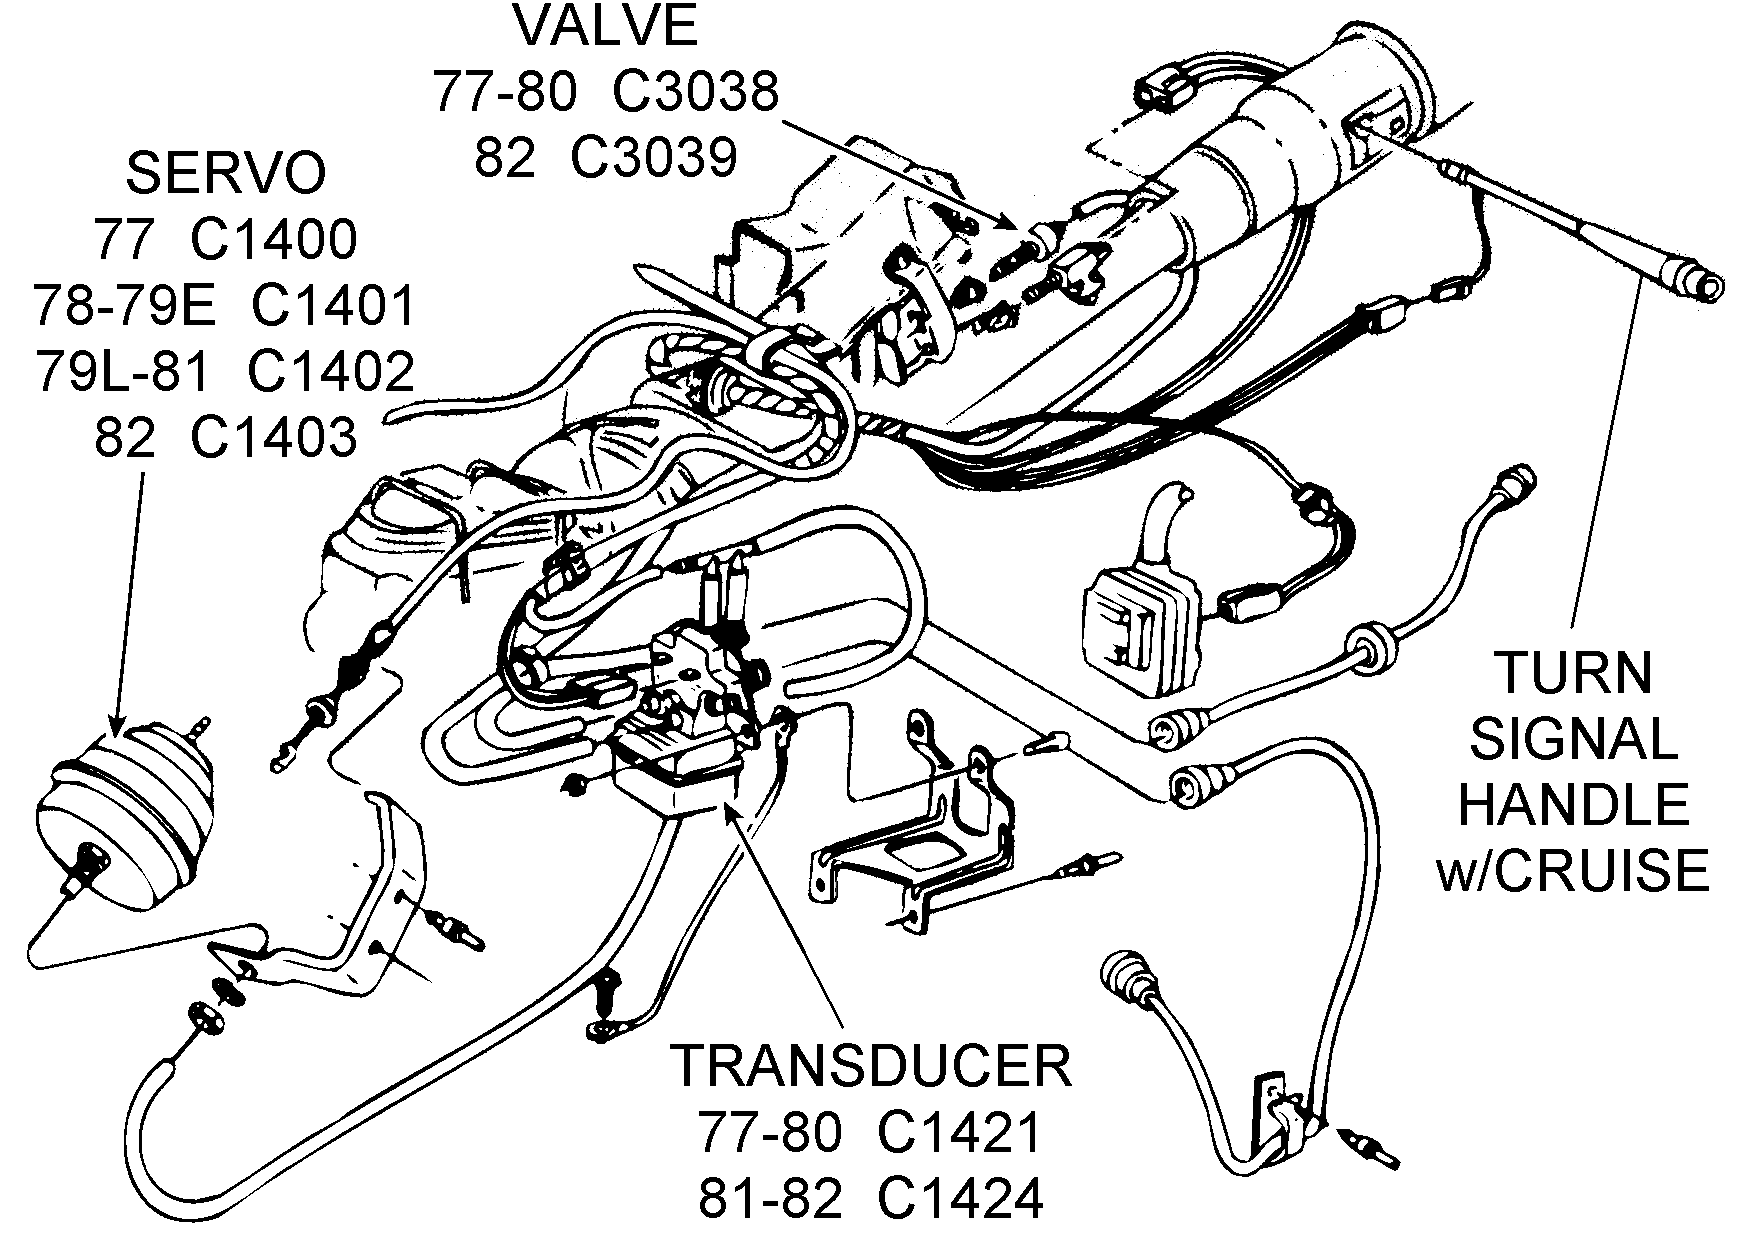 Cruise control Vac Drawing for 1982 with Resume ... 1992 ford f 150 steering column wiring diagram 